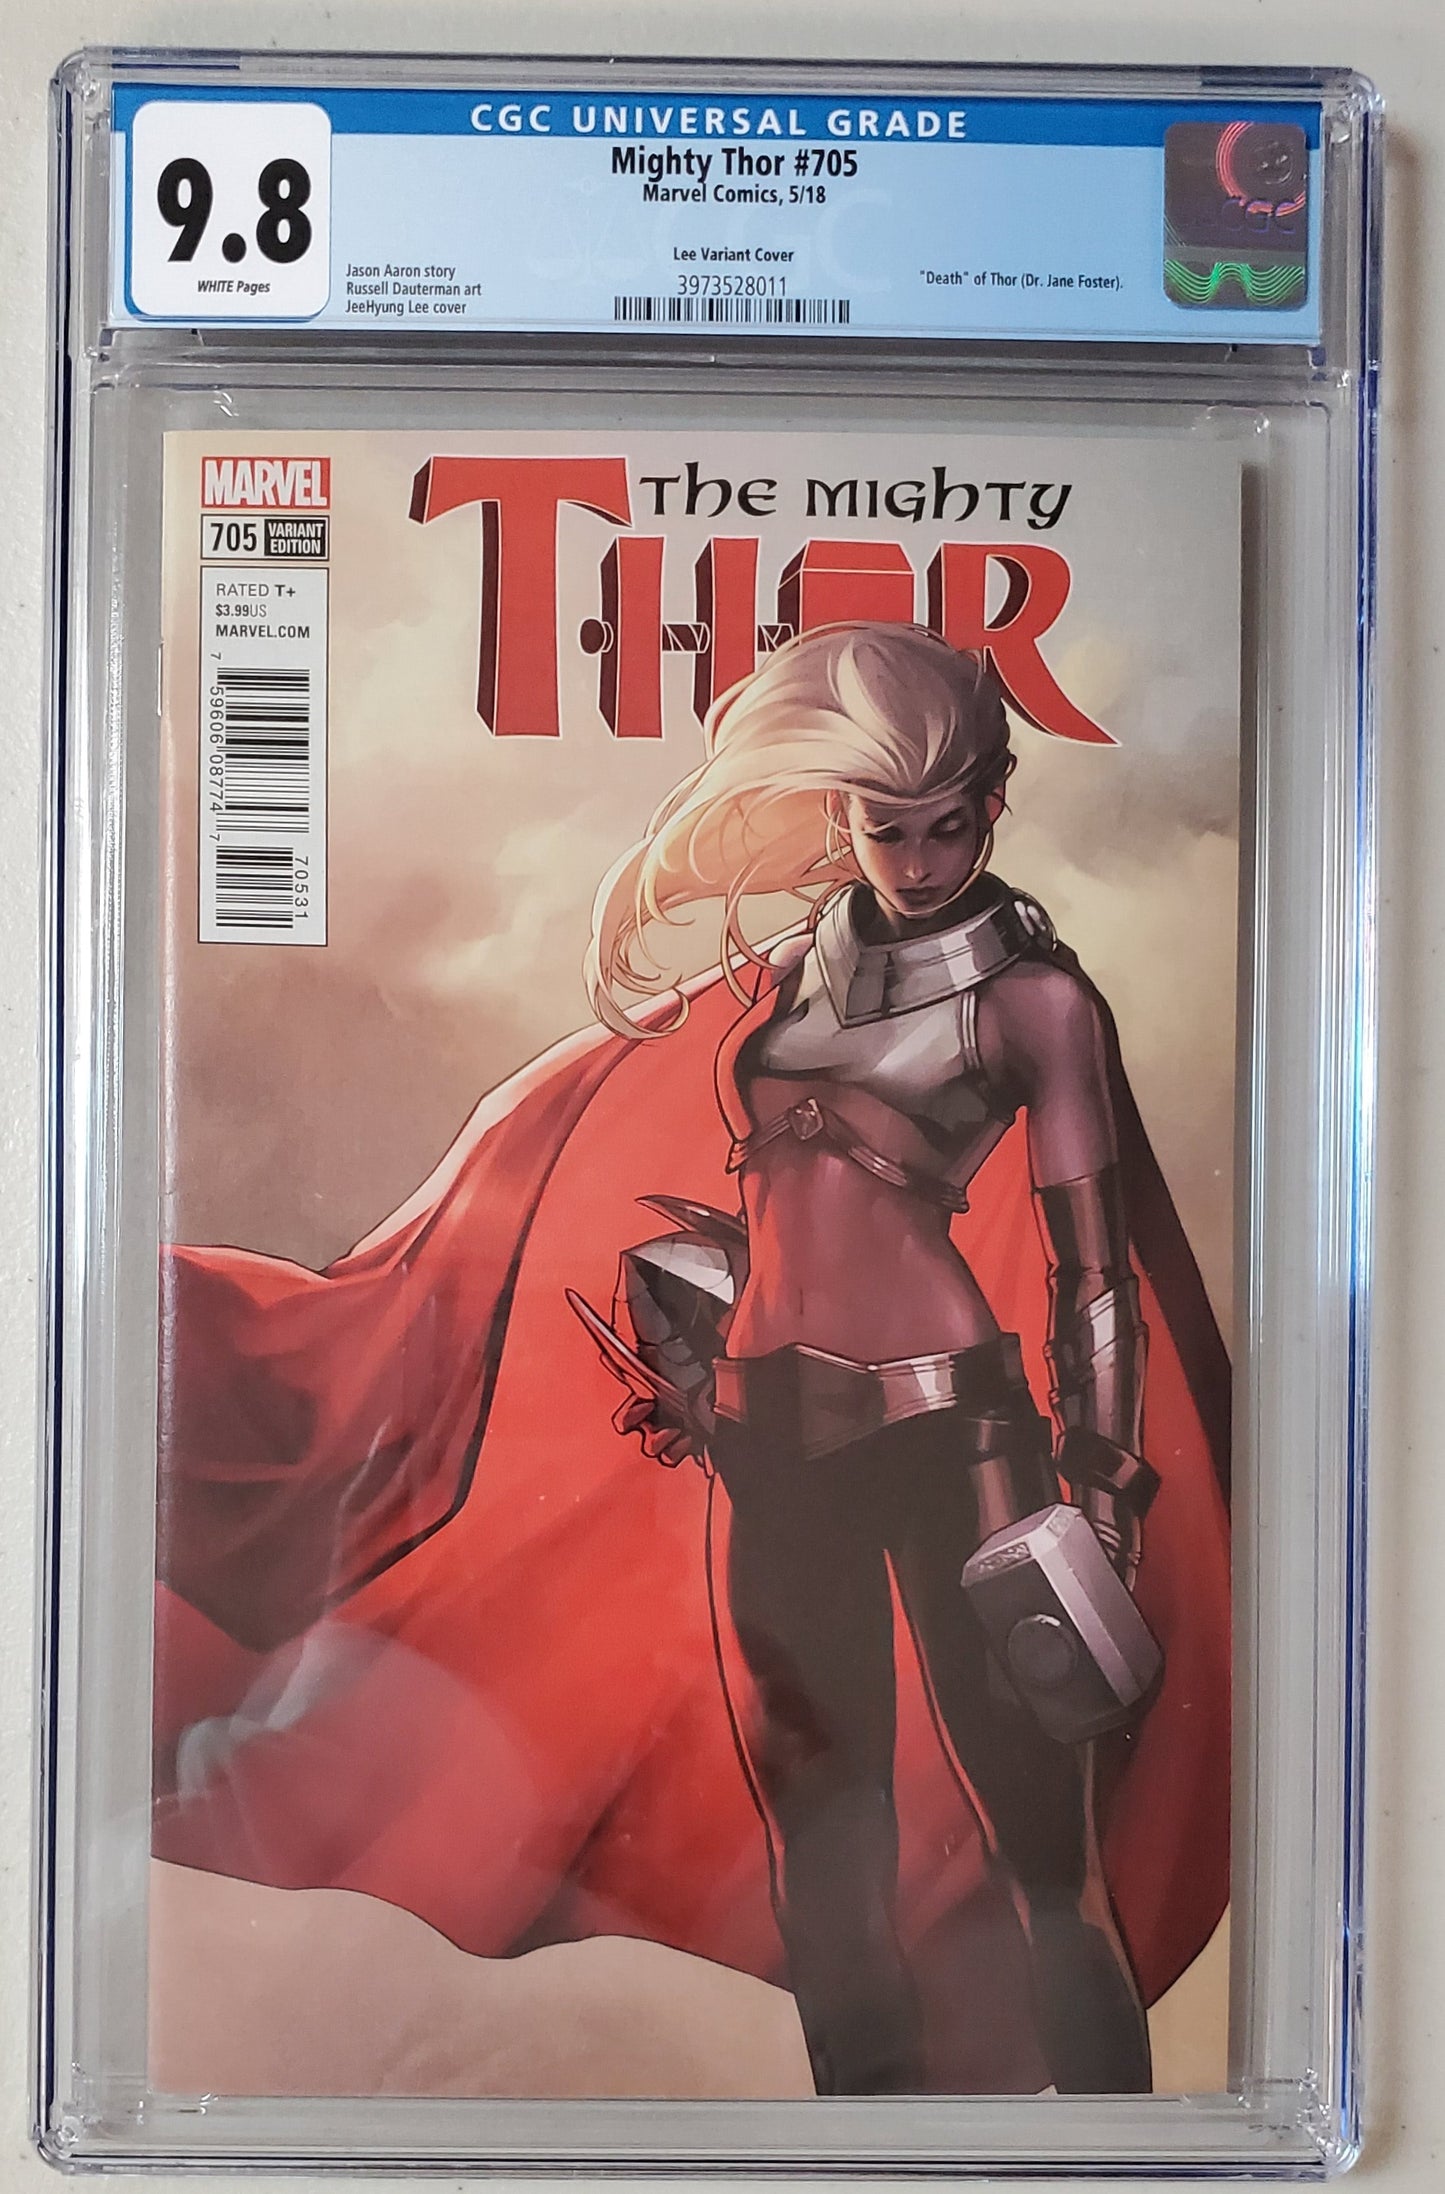 9.8 CGC MIGHTY THOR #705 1:50 JEEHYUNG LEE VARIANT [3973528011]